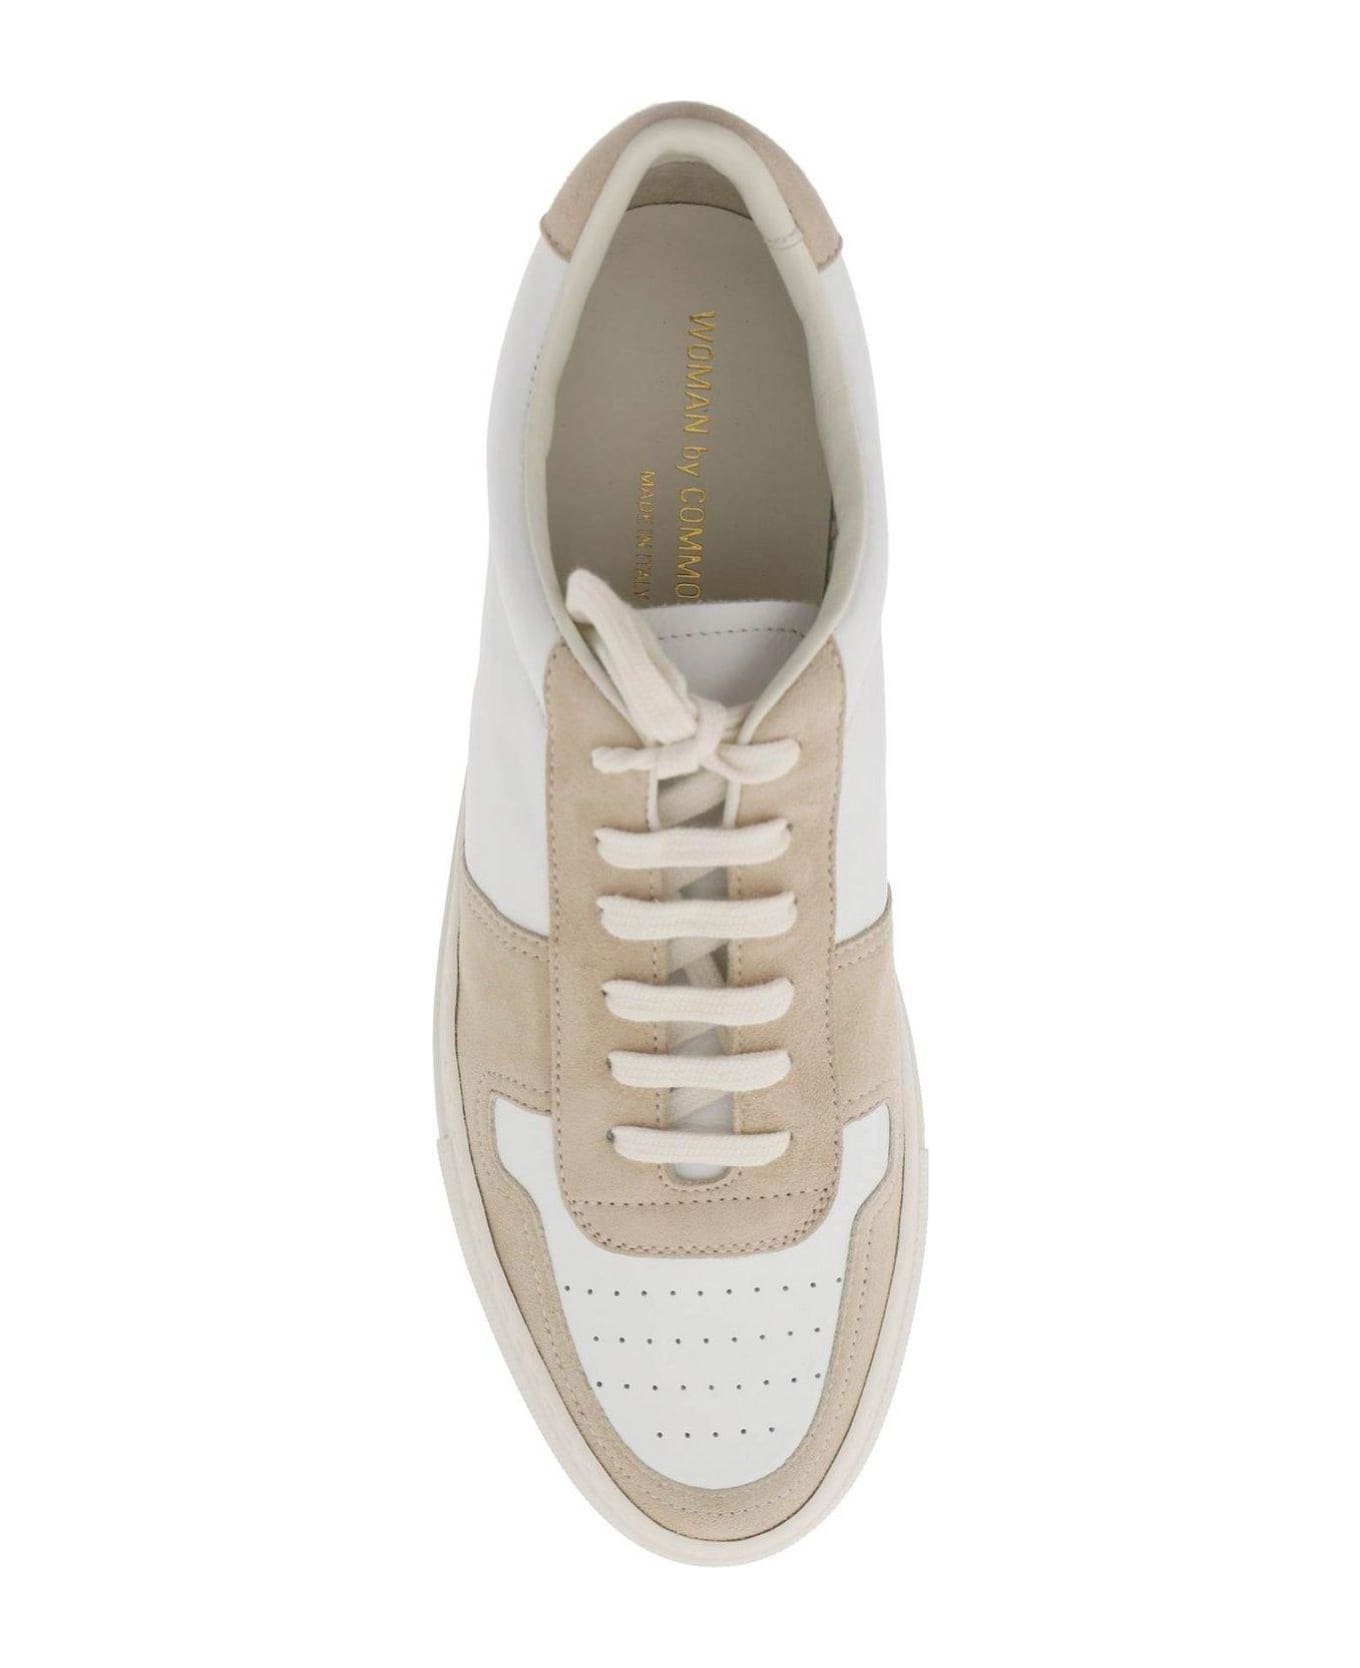 Common Projects Bball Low-top Sneakers - TAN (Beige) スニーカー